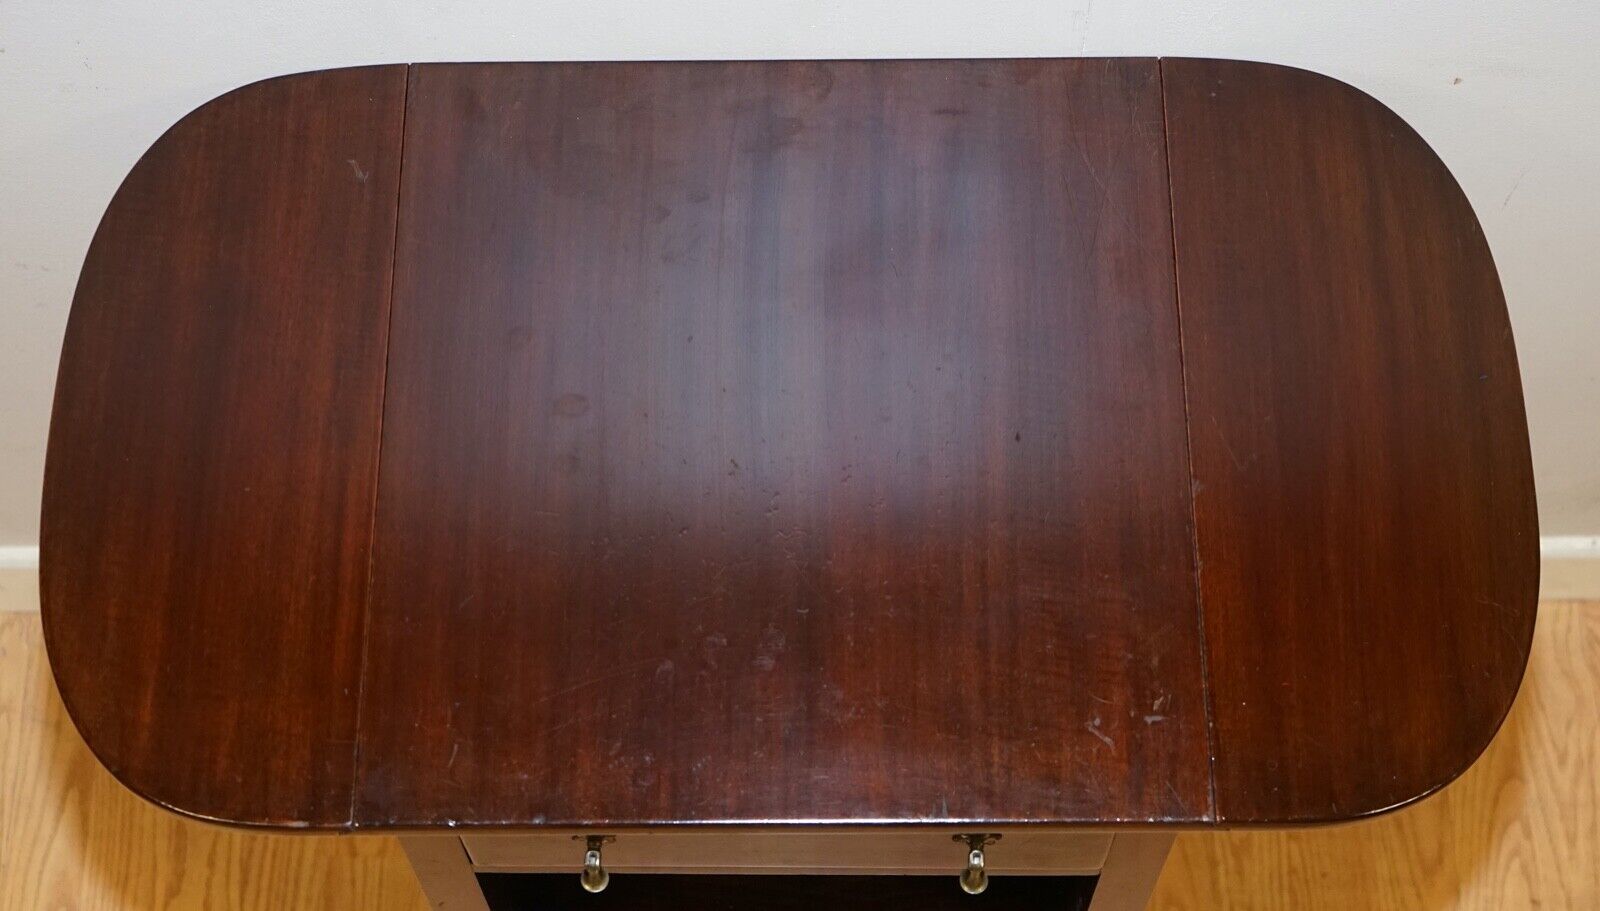 LOVELY VINTAGE MAHOGANY SIDE END HARDWOOD TABLE WITH DRAWER AND SHELFS